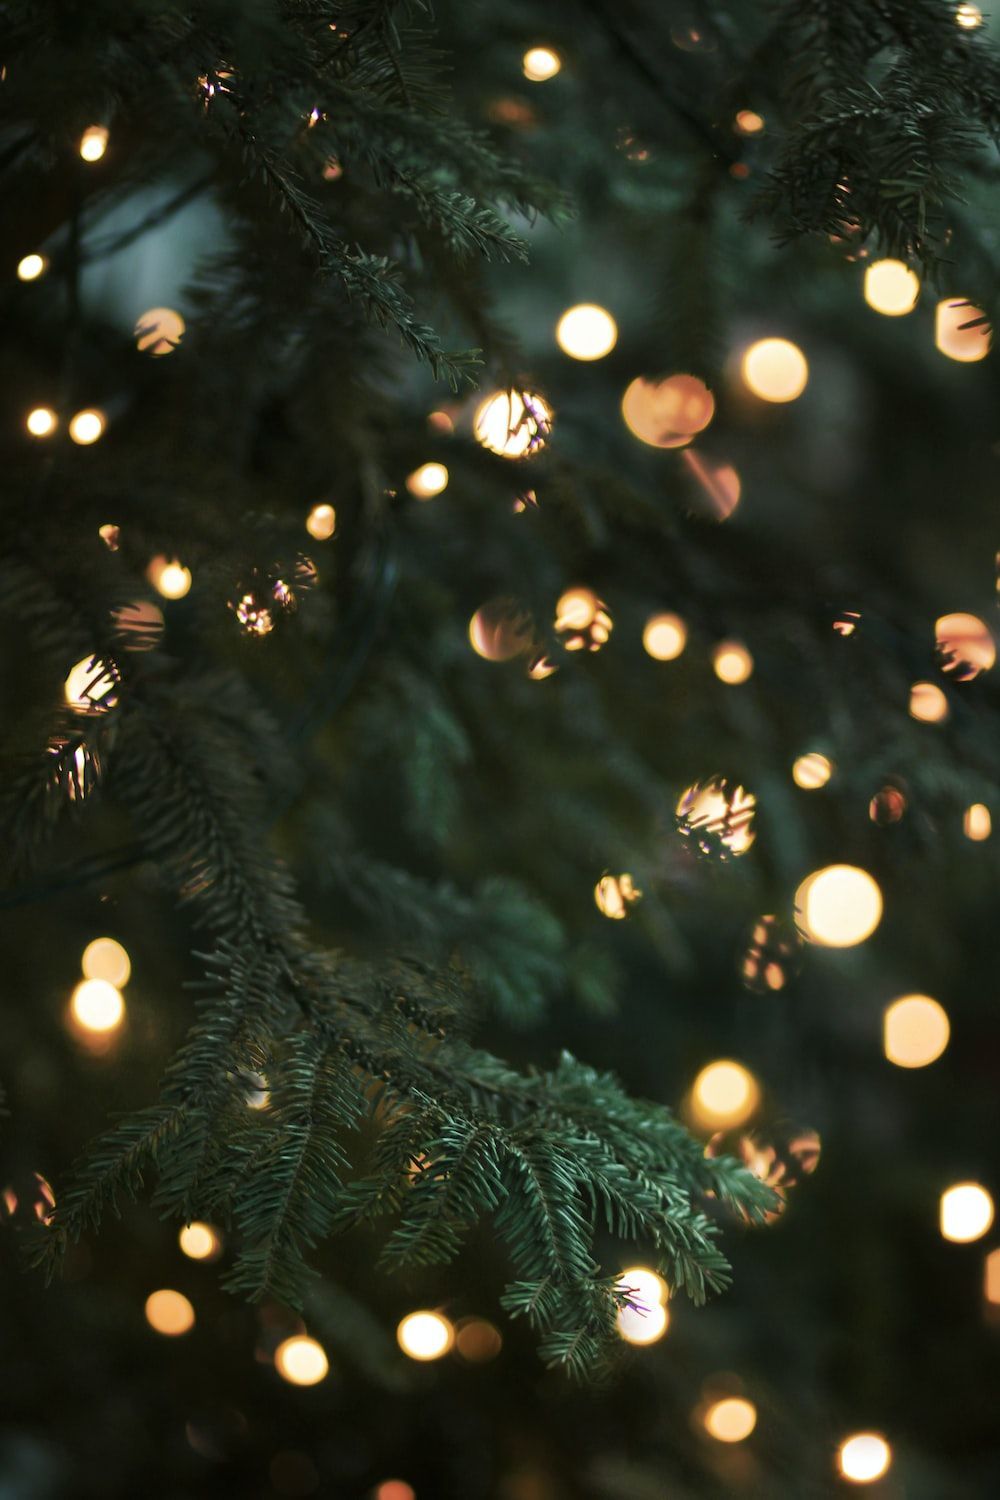 A close up of a Christmas tree with lights on it - Christmas lights, white Christmas